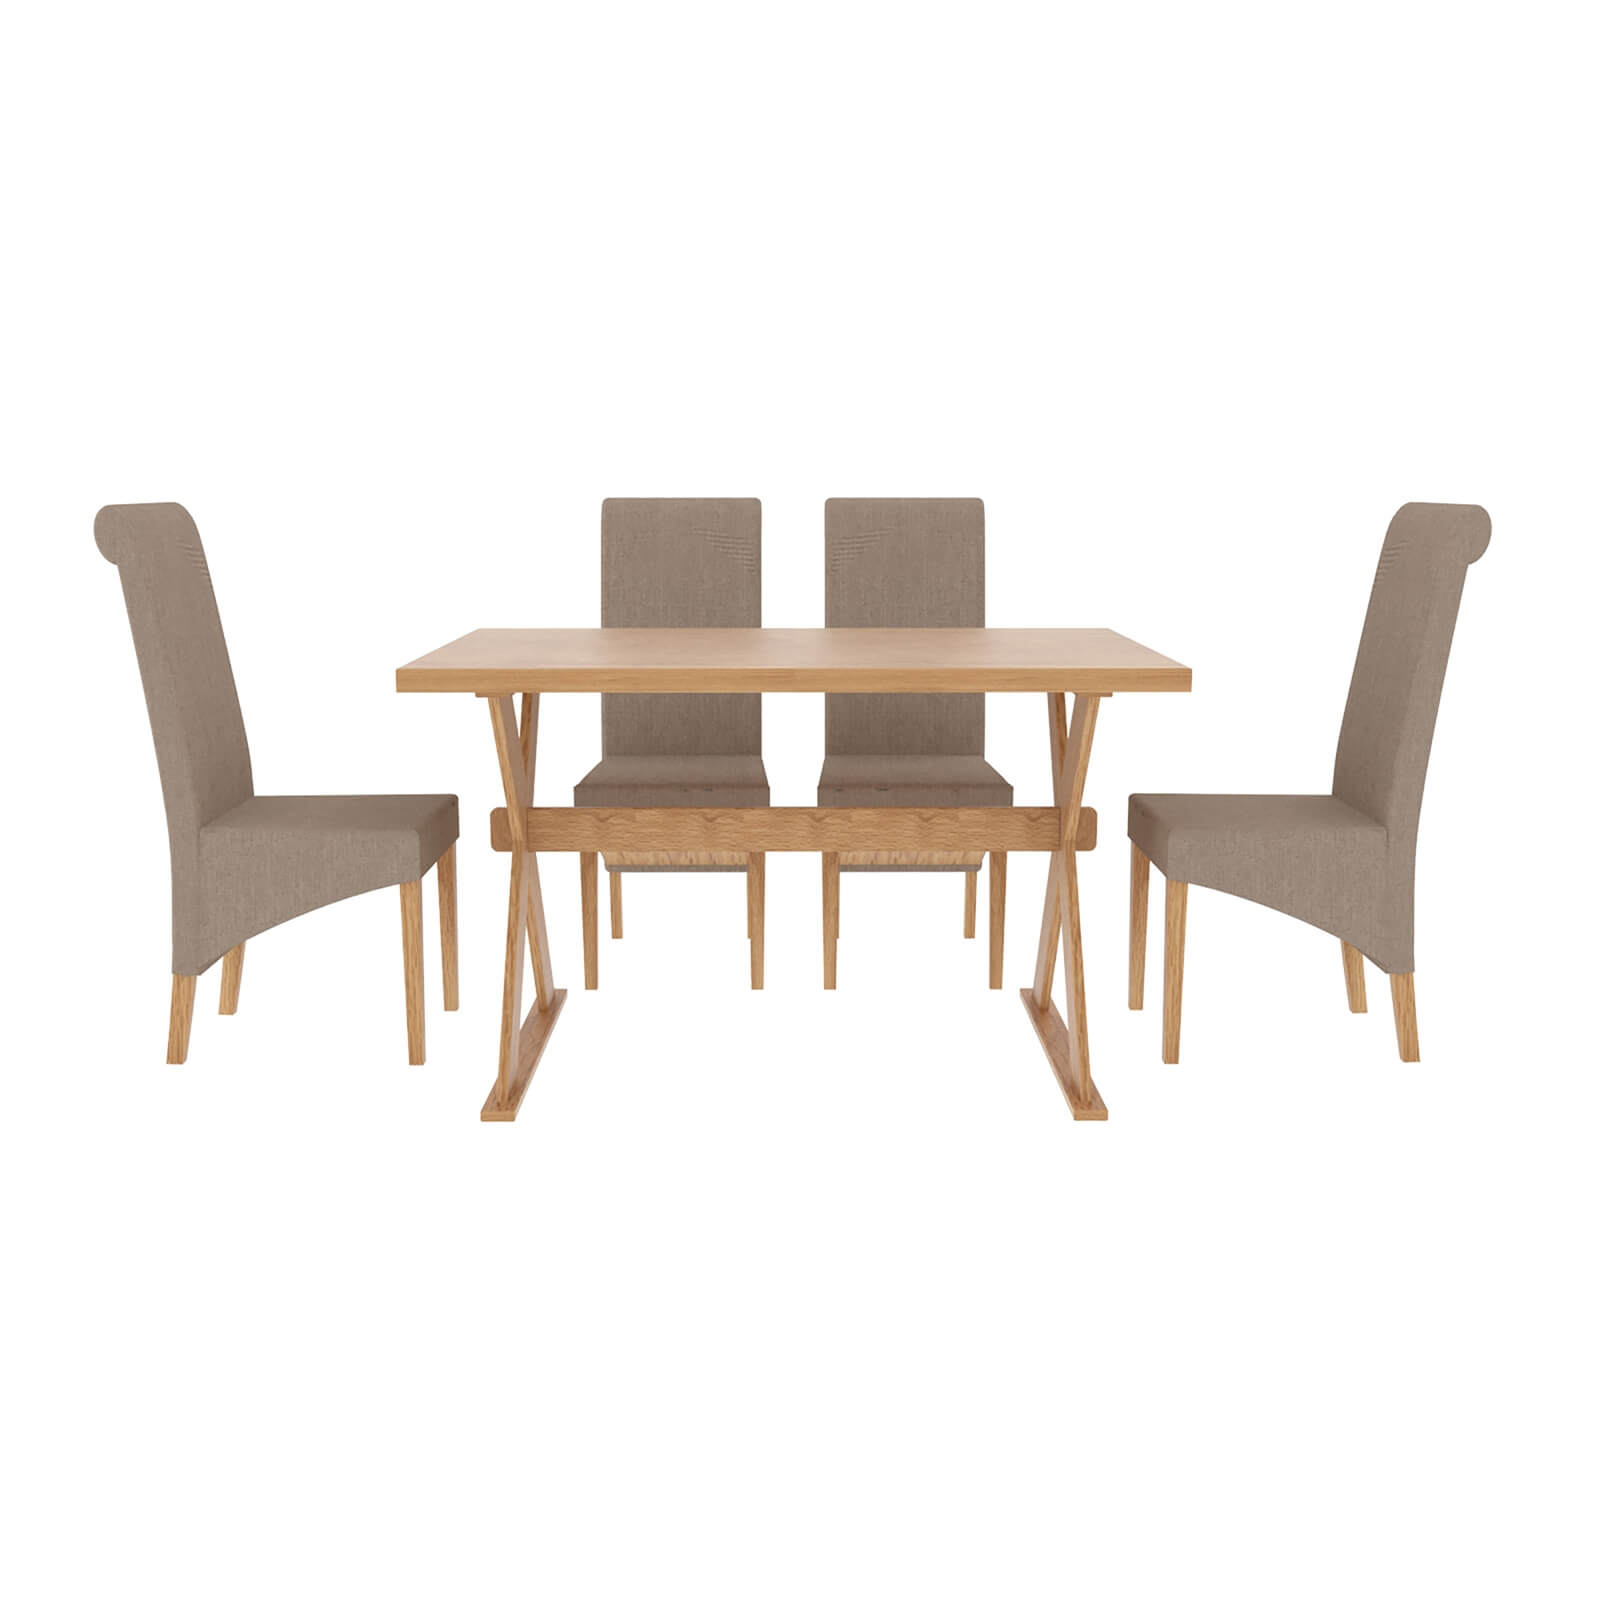 Seville 4 Seater Dining Set - Amelia Dining Chairs - Beige